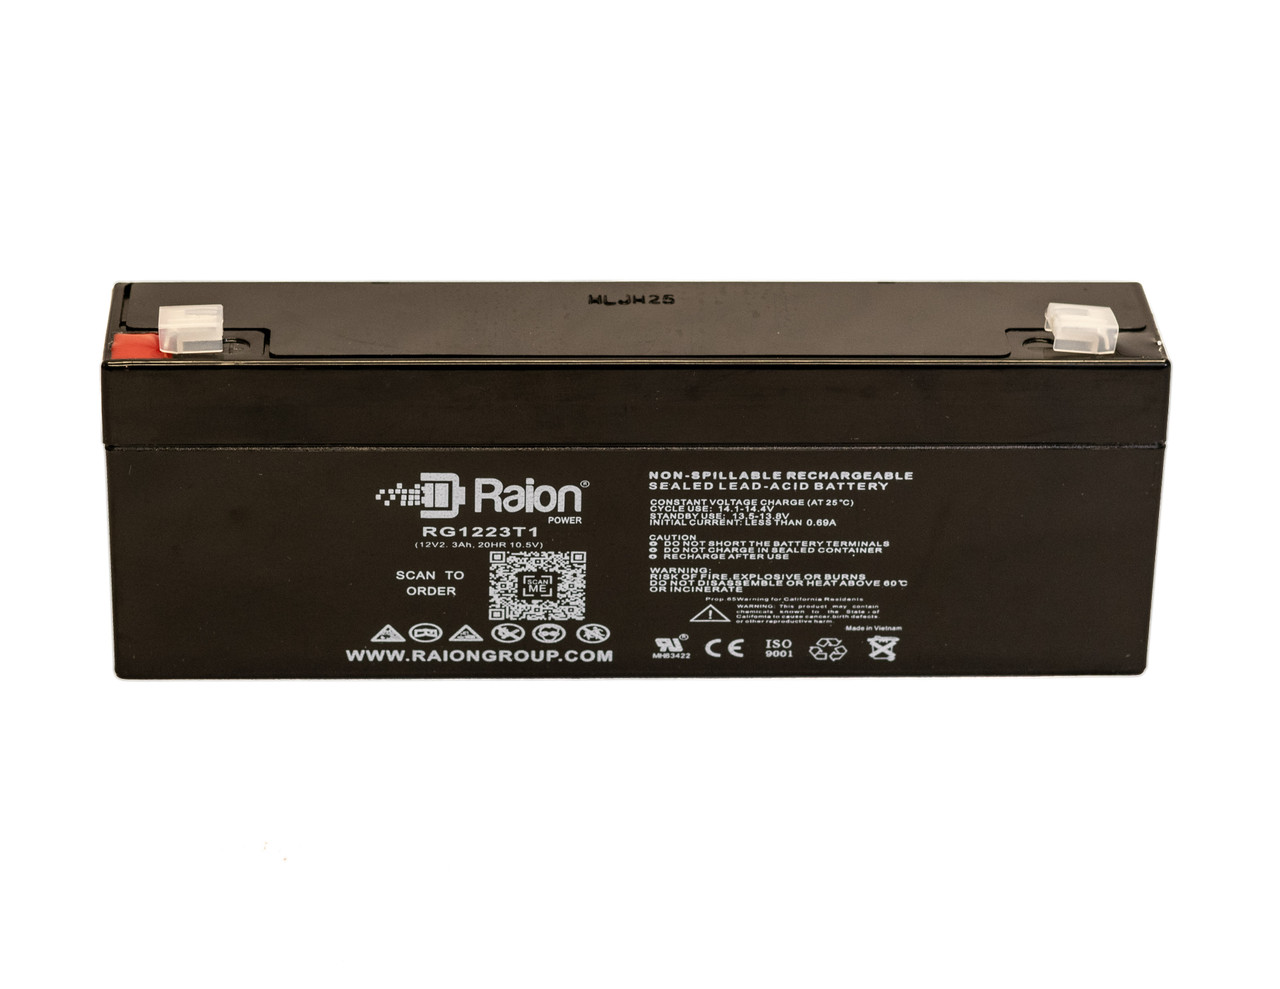 Raion Power 12V 2.3Ah SLA Battery With T1 Terminals For Alexander MB5089